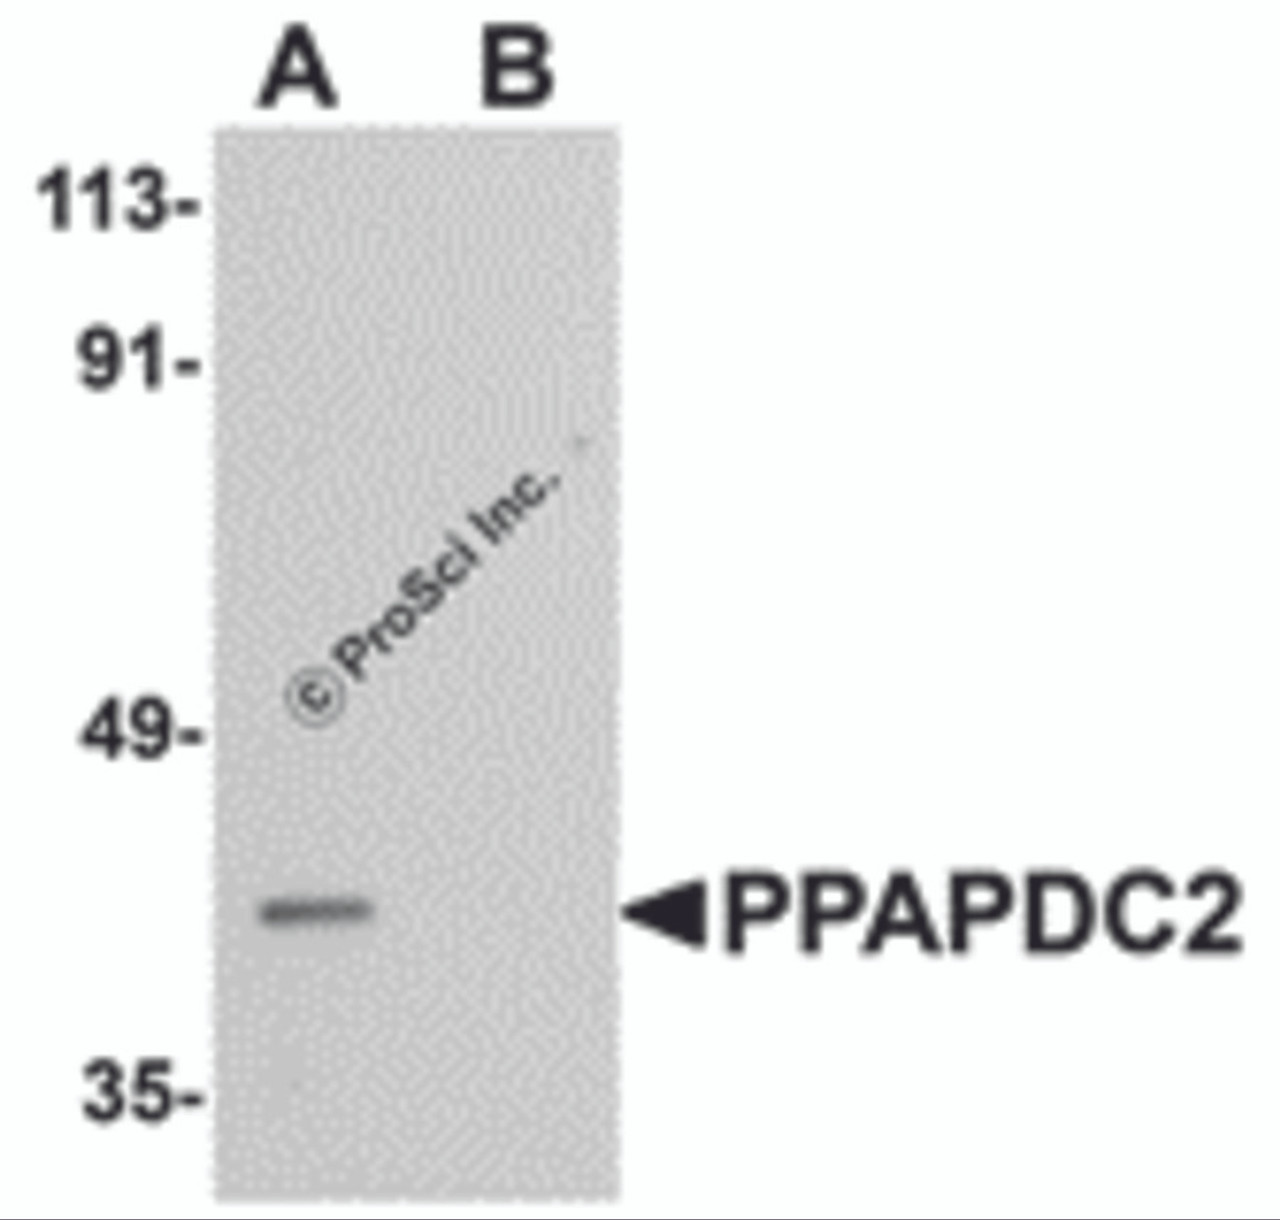 Western blot analysis of PPAPDC2 in Raji cell lysate with PPAPDC2 antibody at 1 &#956;g/mL in (A) the absence and (B) the presence of blocking peptide.